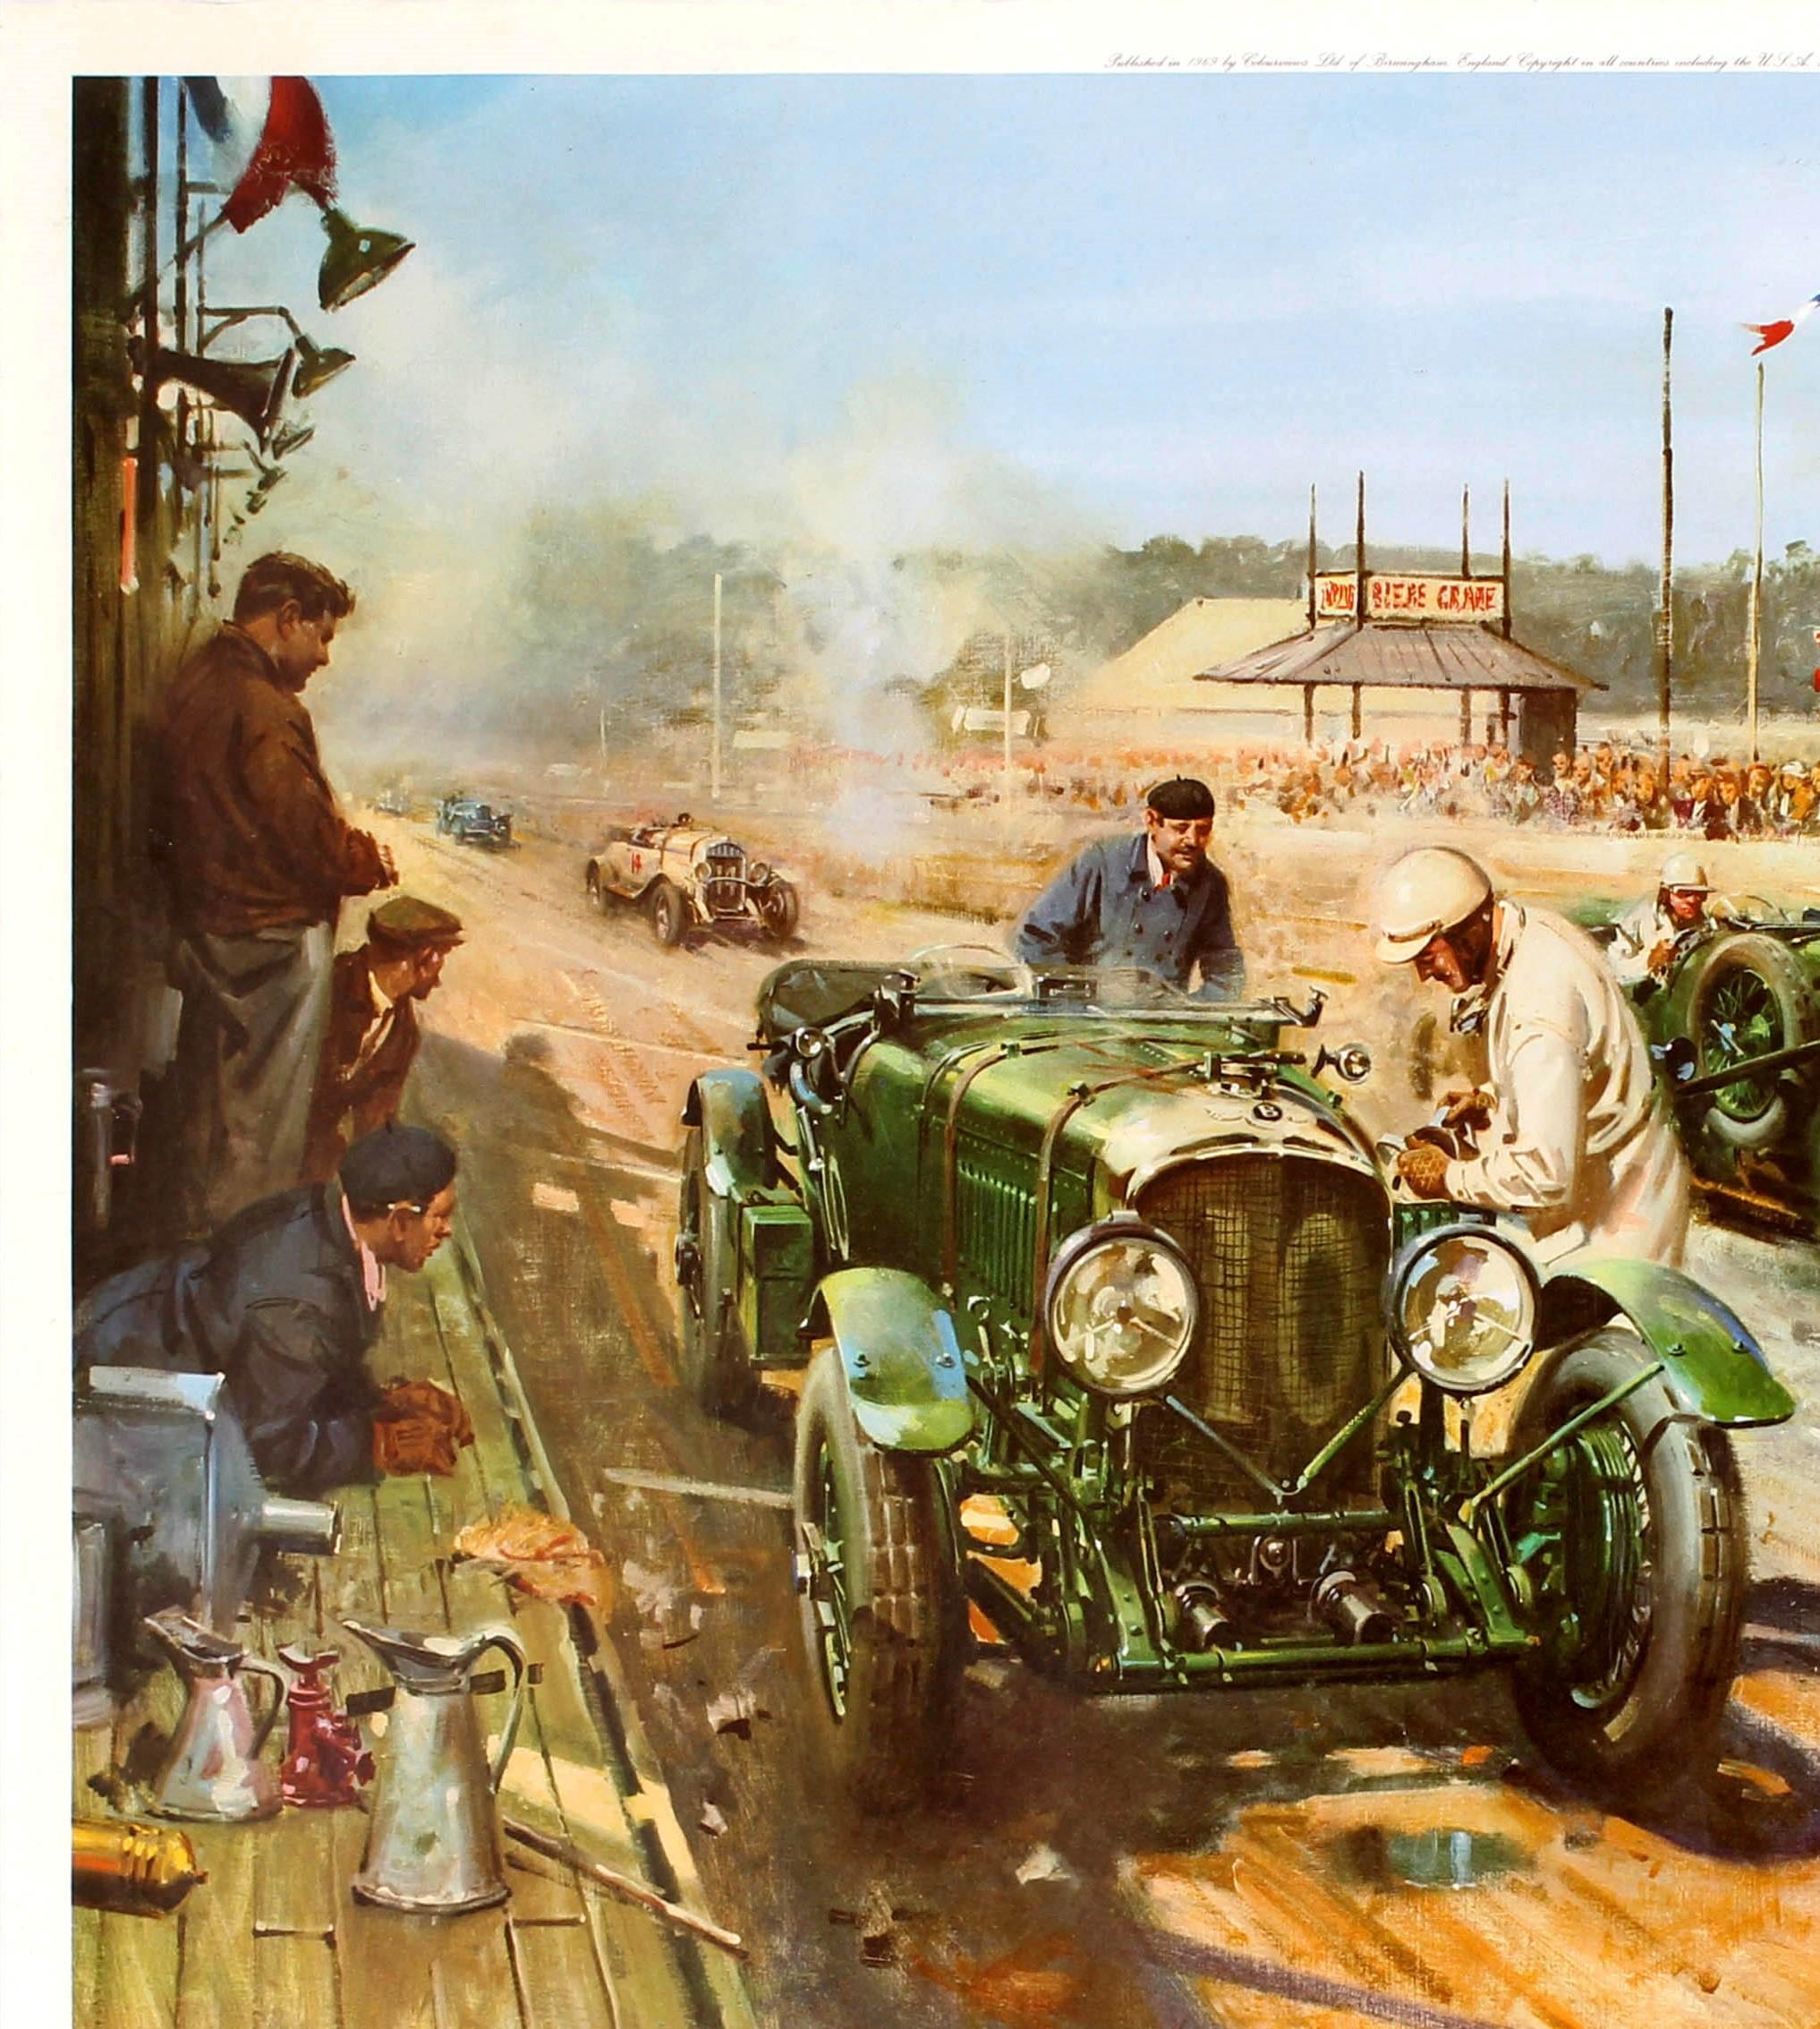 Original Vintage Bentley Motor Poster By Cuneo Bentleys At Le Mans 1929 Car Race - Print by Terence Cuneo